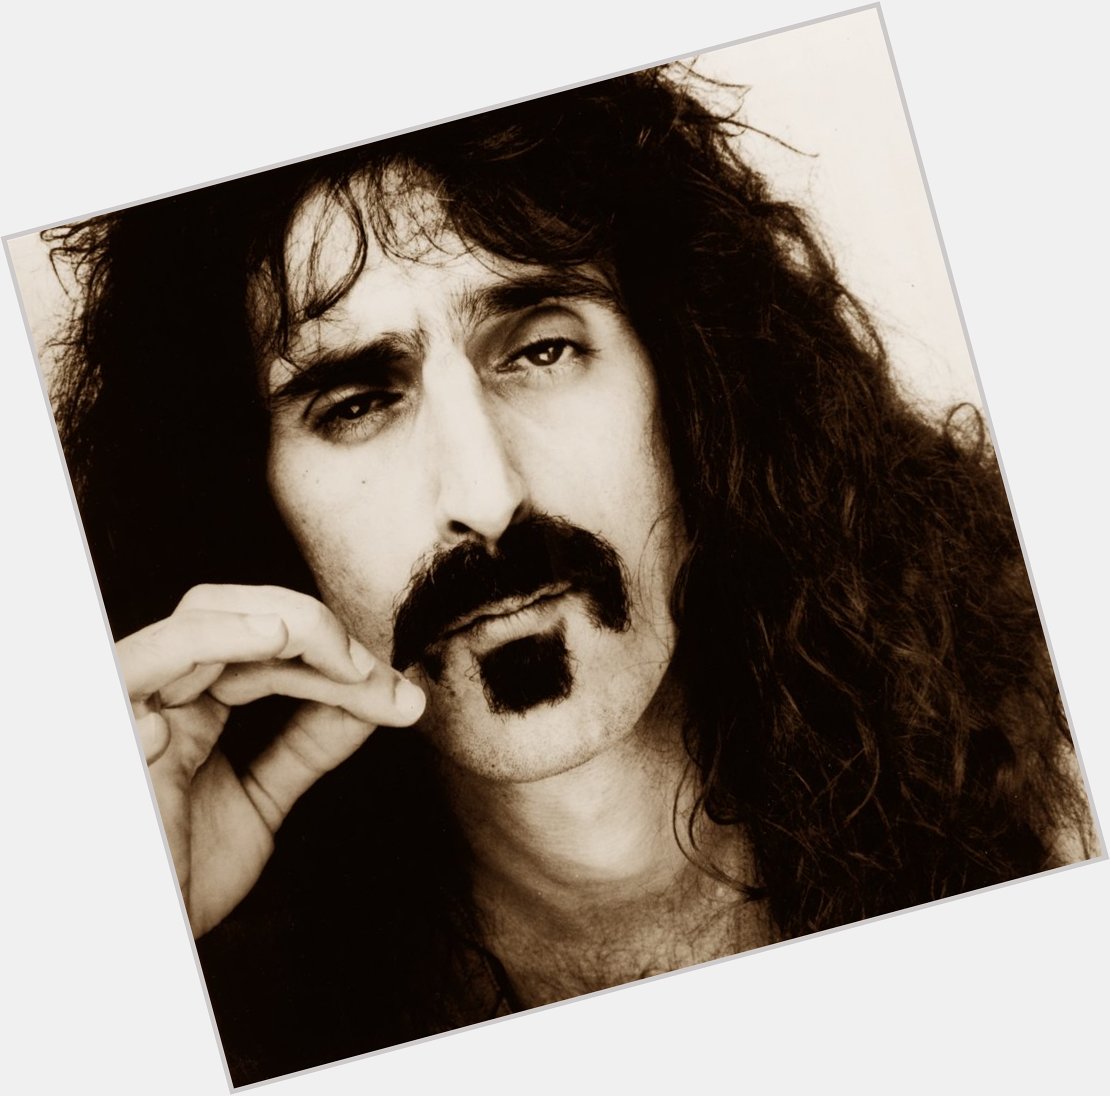 Happy Birthday to the late great Frank Zappa !! He would\ve been 75 today. 